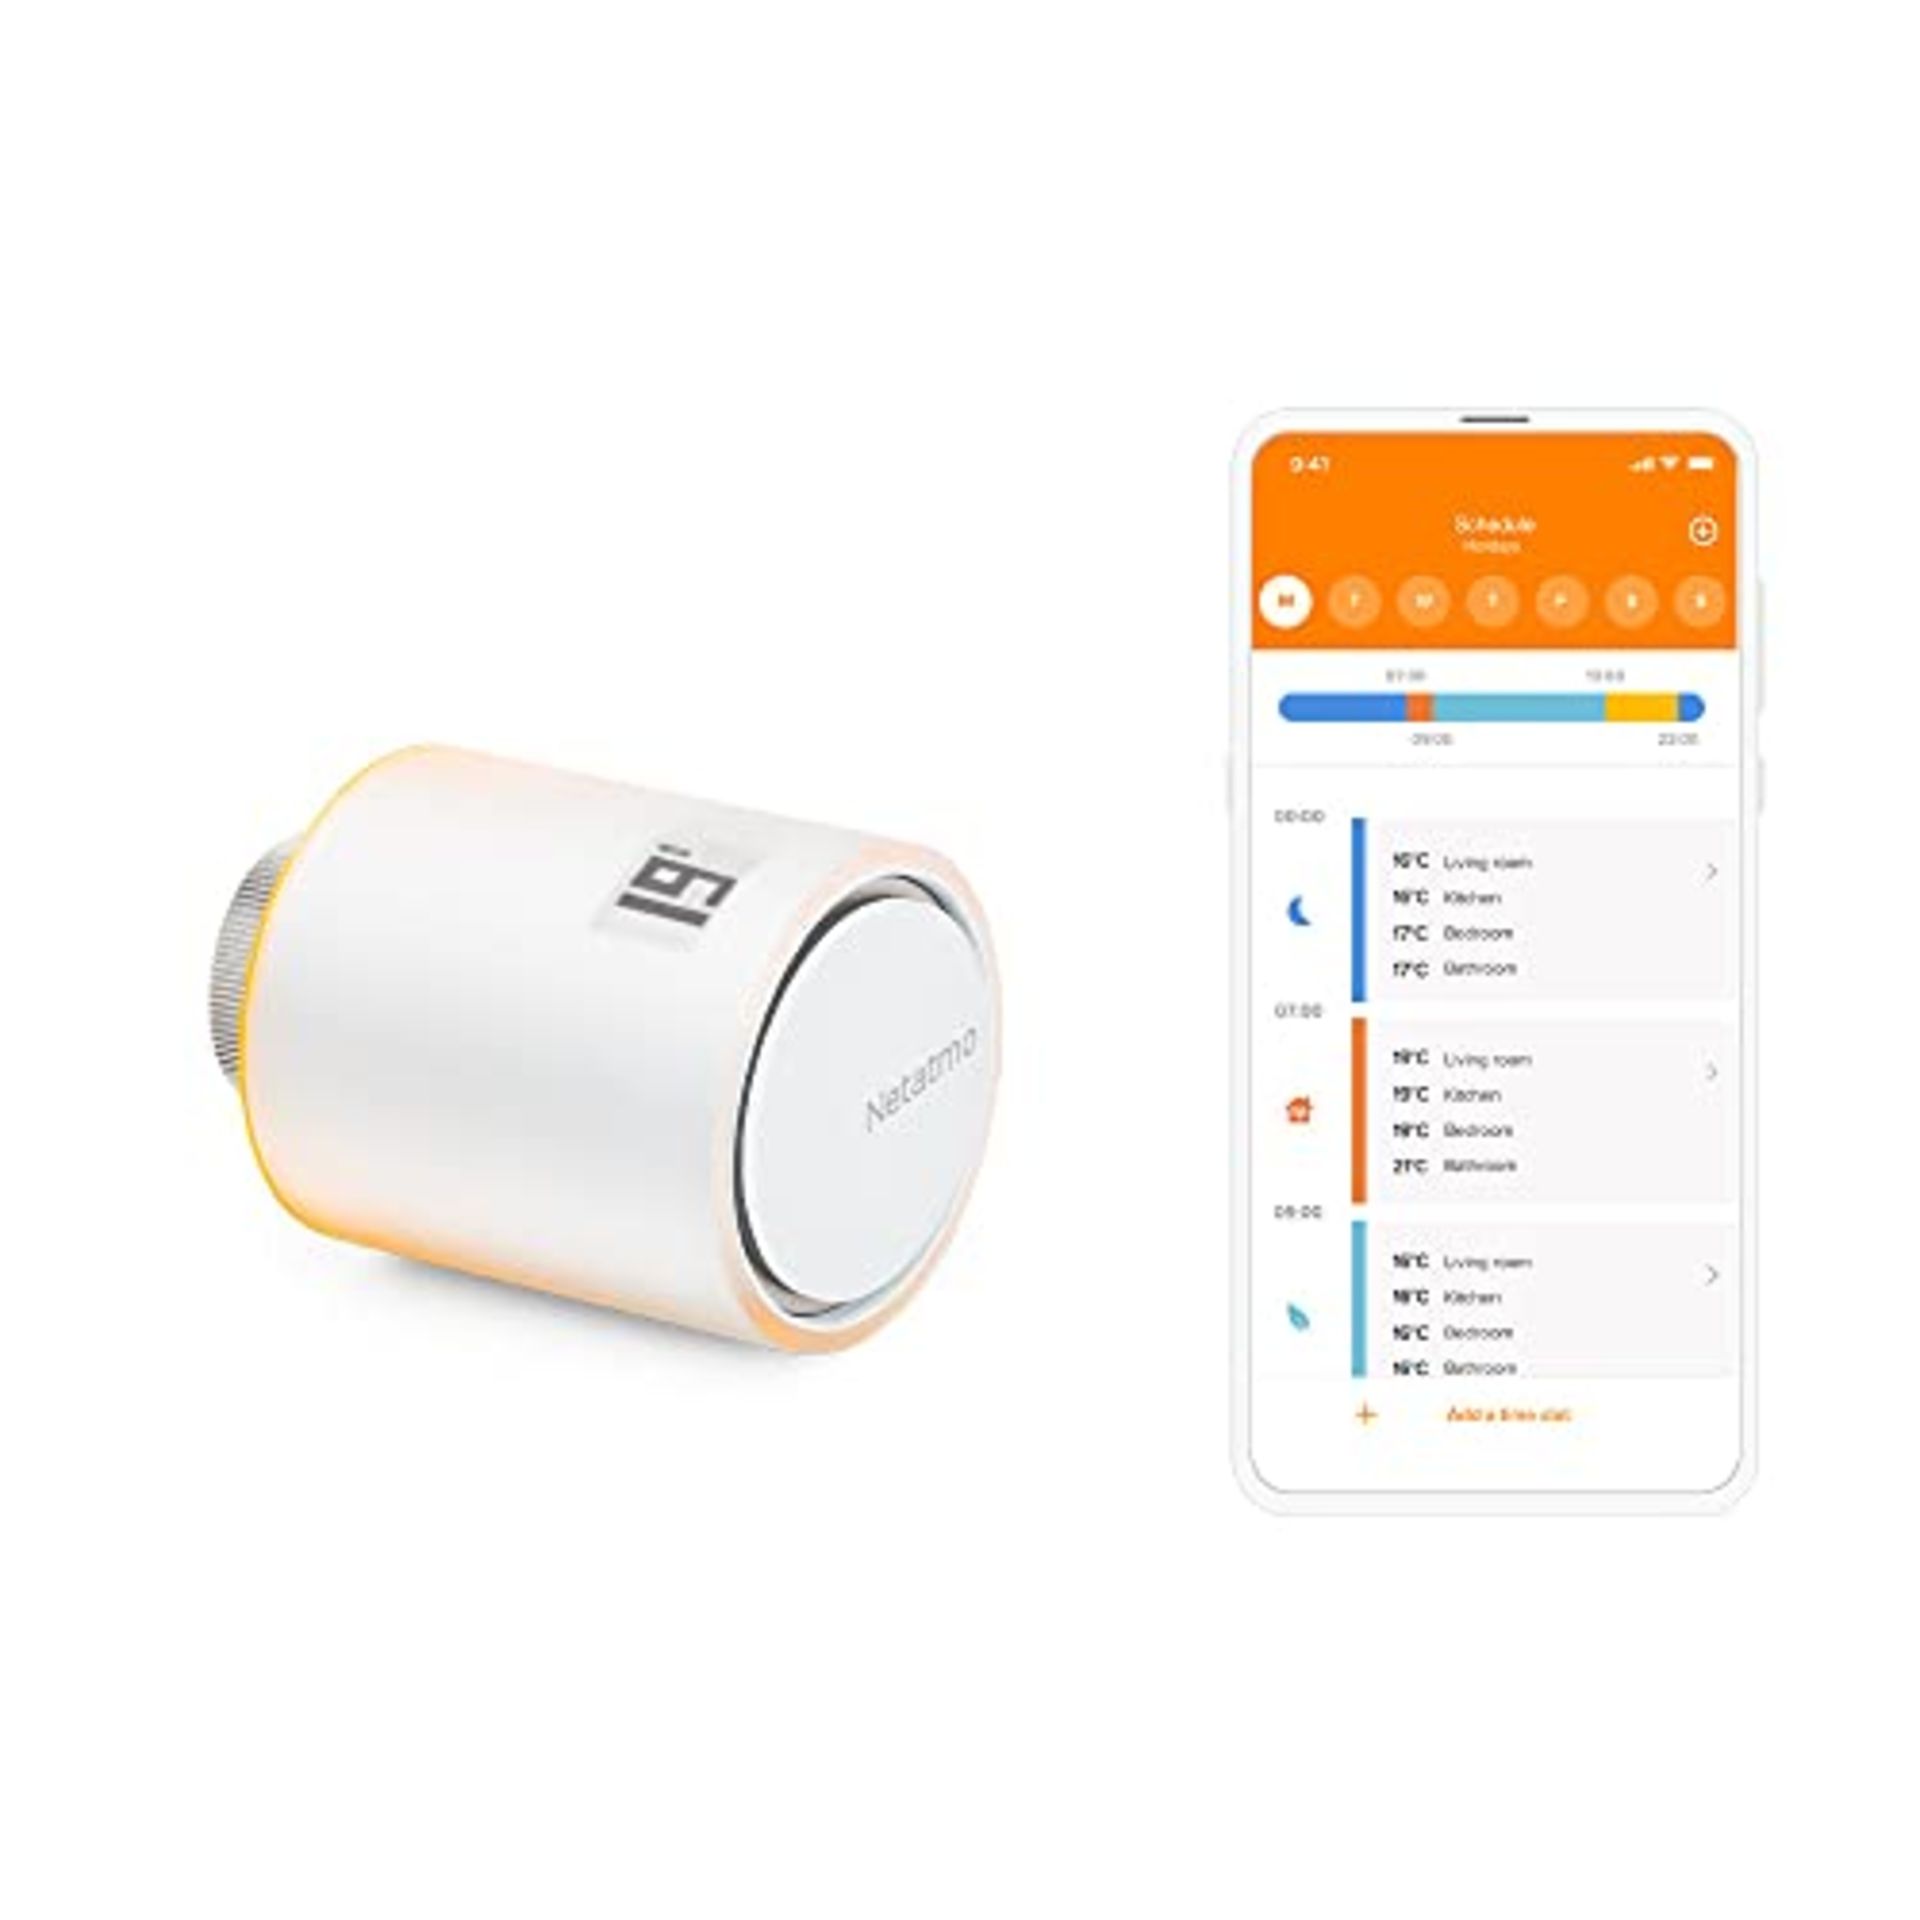 RRP £79.00 Netatmo Smart Connected Thermostatic Head - Remote Control - Energy Savings - Accessor - Image 4 of 6